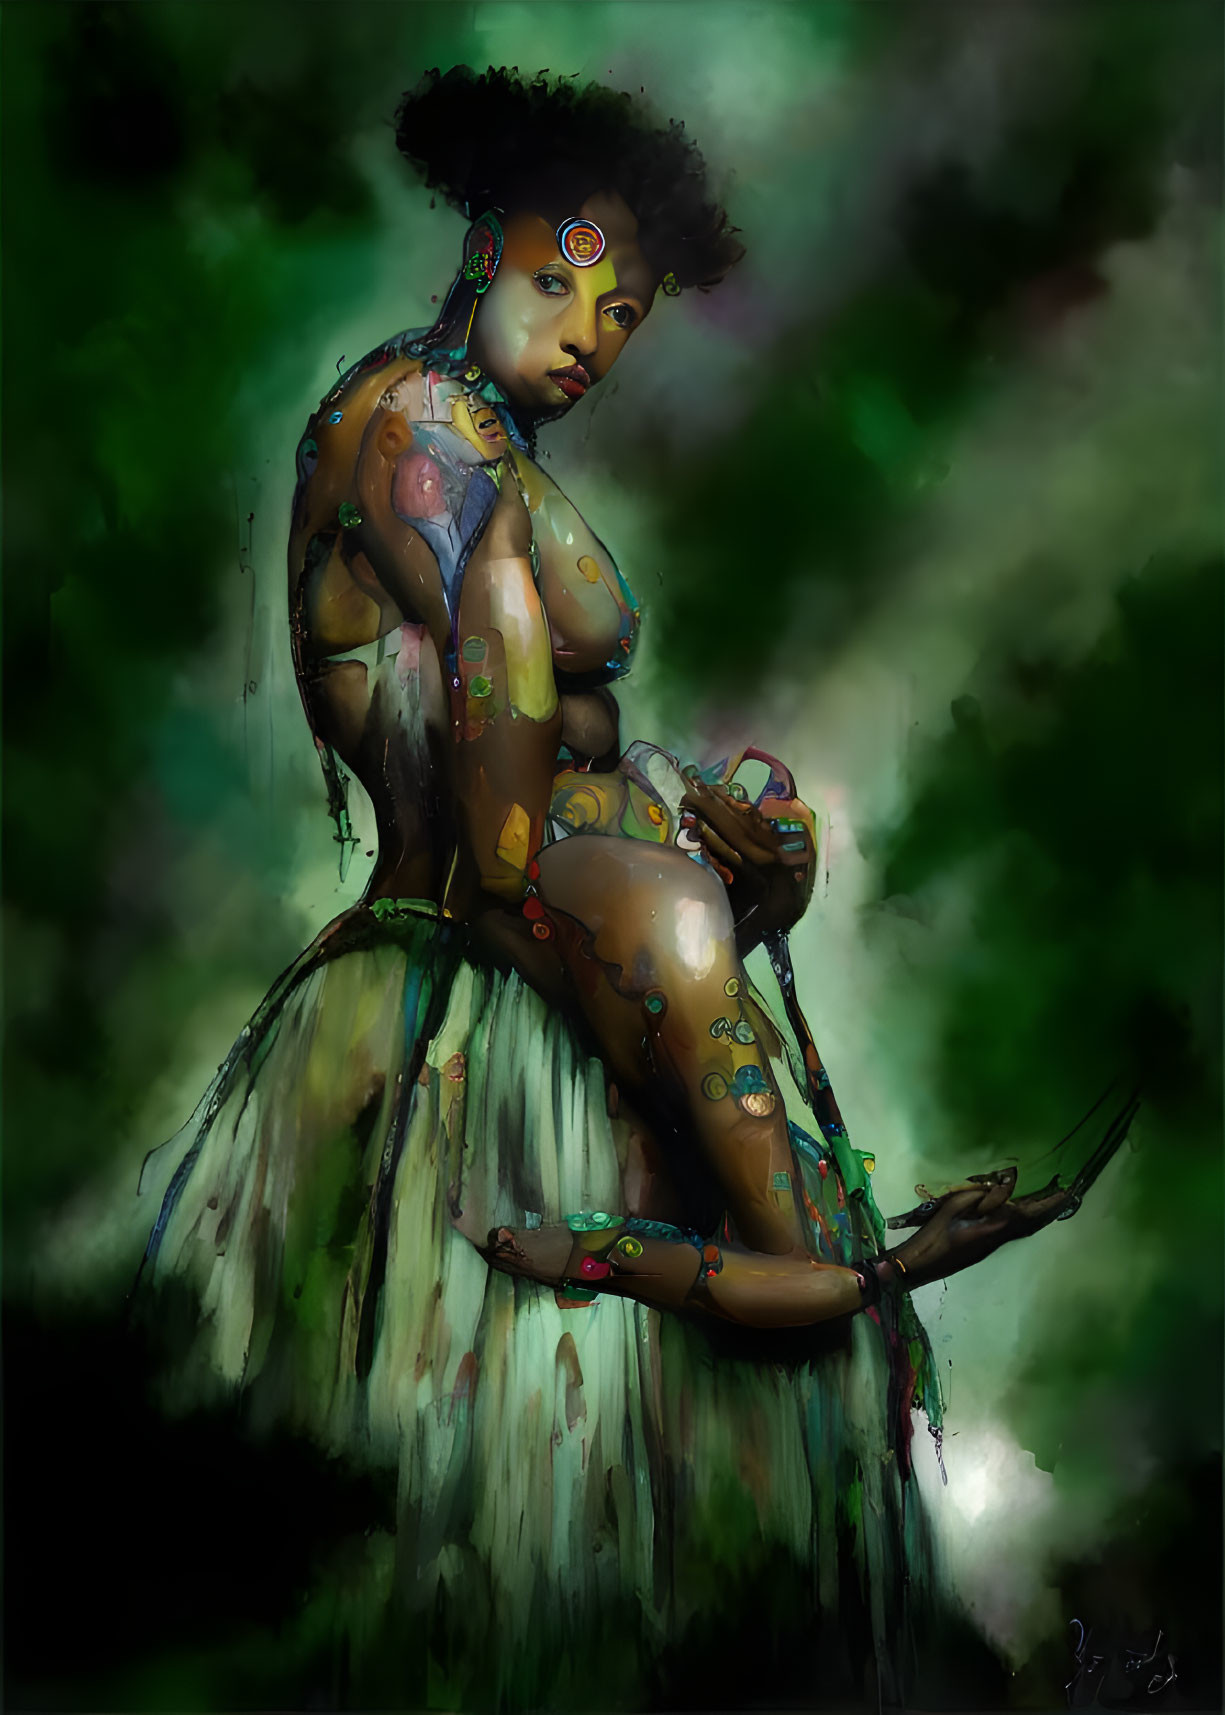 Fantastical dark-skinned woman with colorful body art in green skirt on mystical backdrop